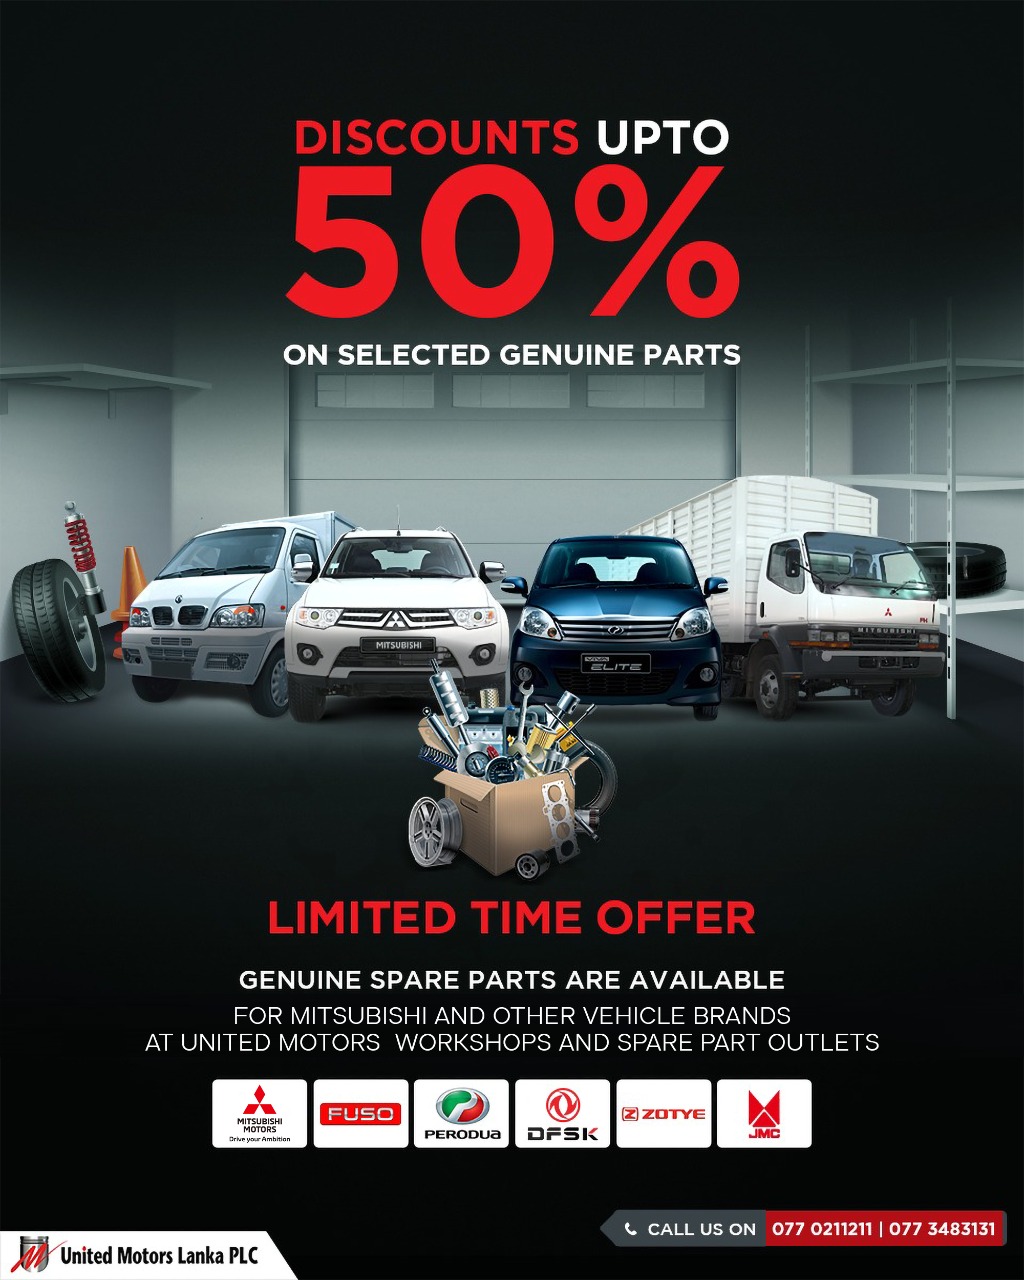 Image for Discounts up to 50% on selected genuine parts